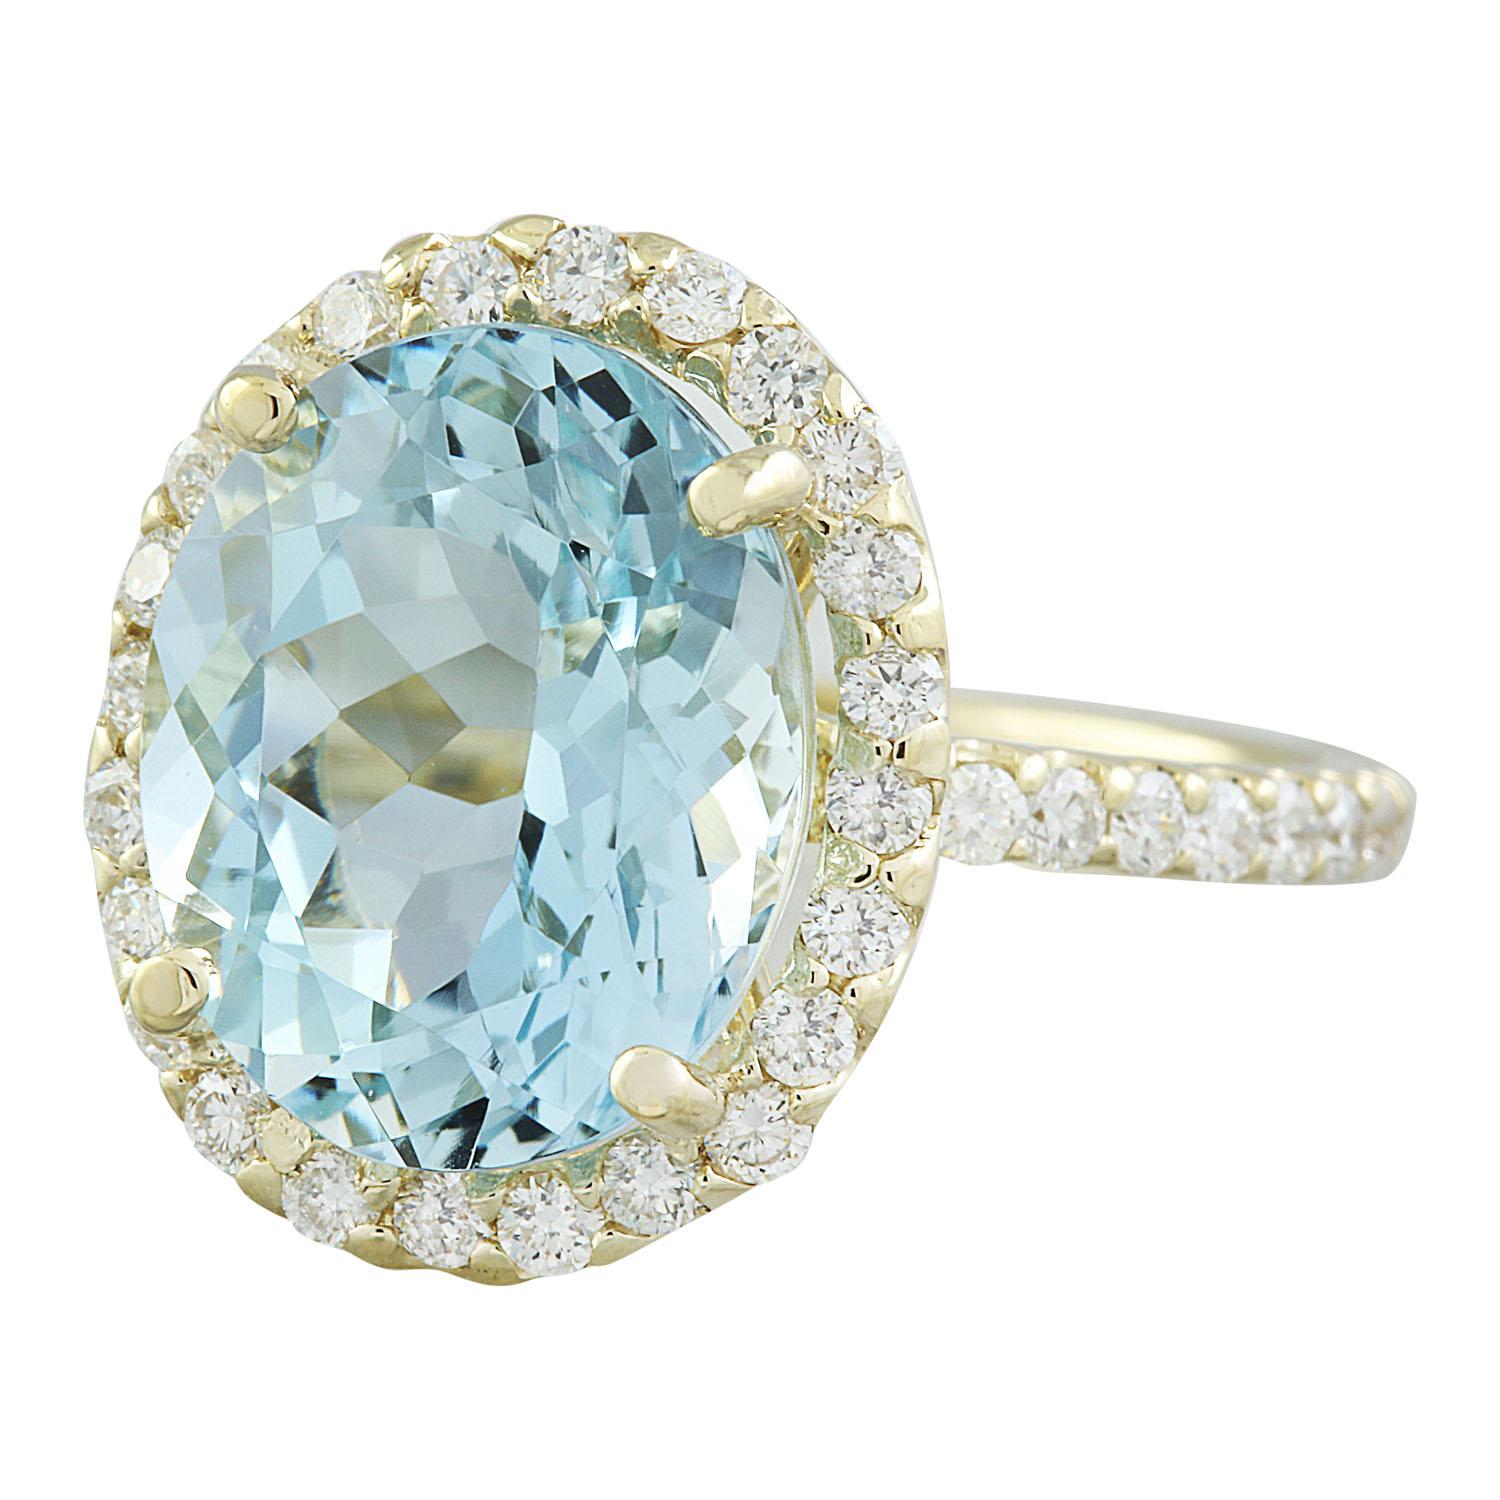 7.07 Carat Natural Aquamarine 14 Karat Solid Yellow Gold Diamond Ring
Stamped: 14K 
Total Ring Weight: 3.8 Grams 
Aquamarine Weight 6.17 Carat (13.00x11.00 Millimeters)
Diamond Weight: 0.90 carat (F-G Color, VS2-SI1 Clarity )
Face Measures: